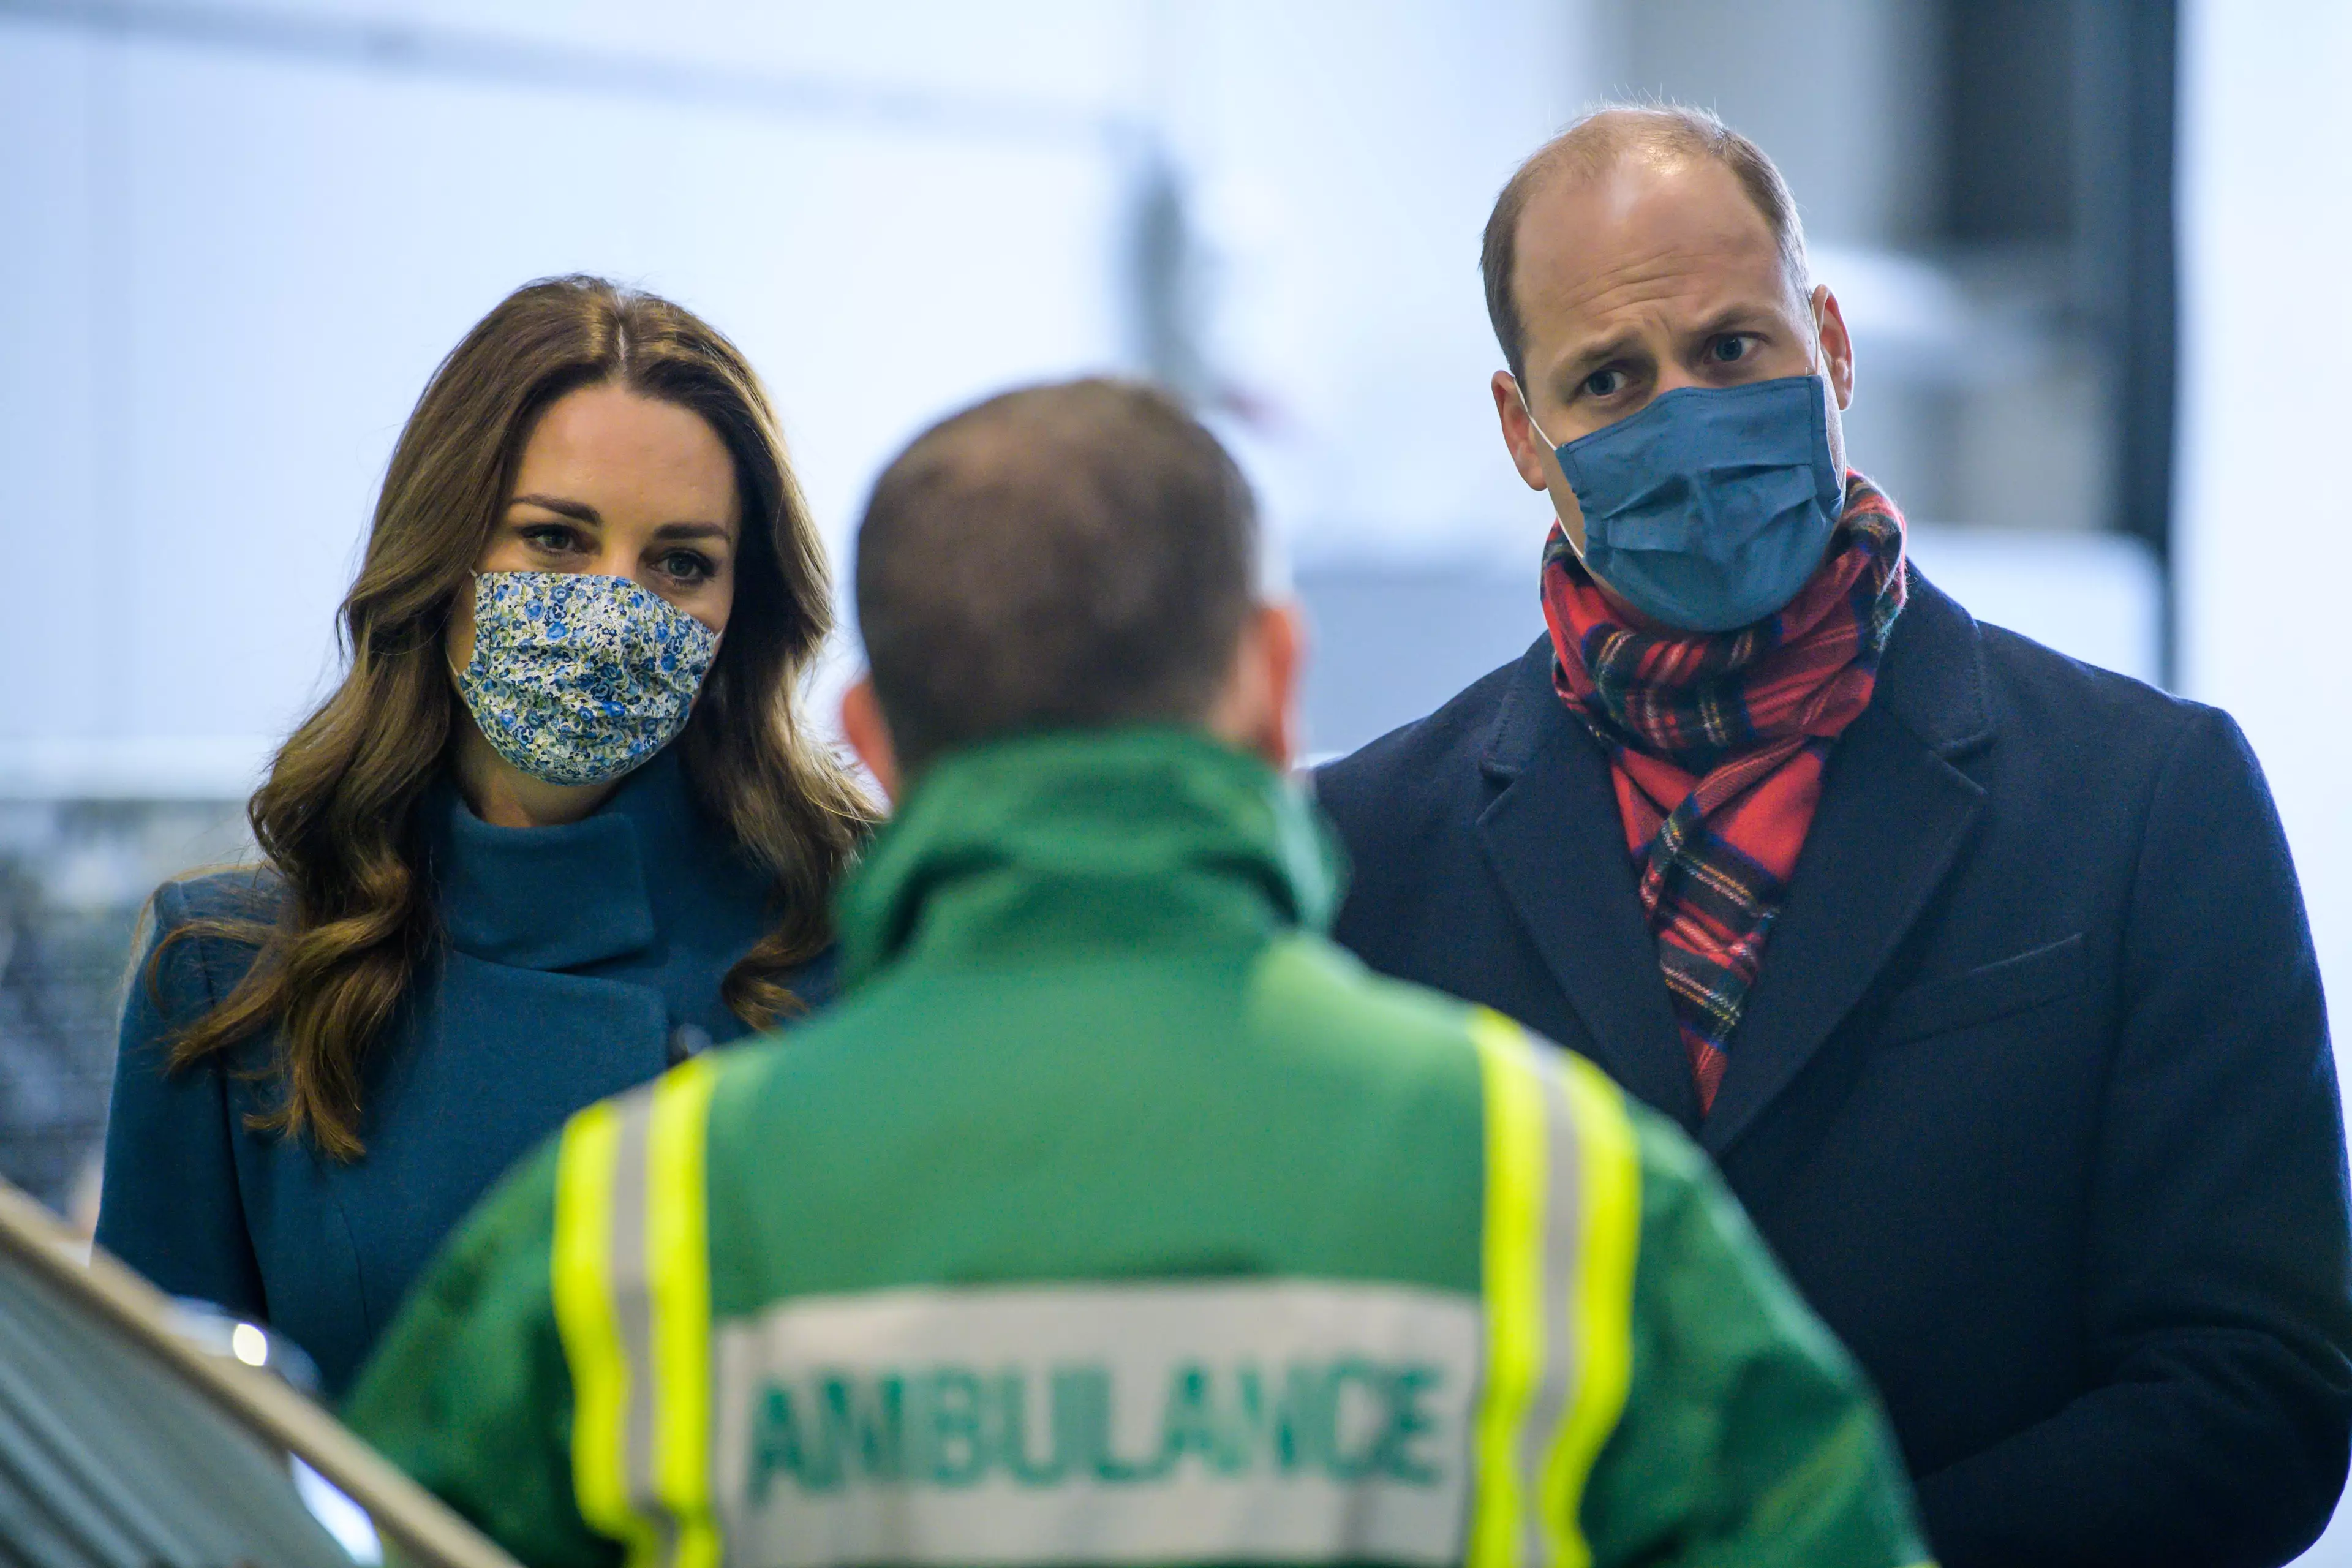 The Duke and Duchess thanked communities and key workers for their role in the pandemic (